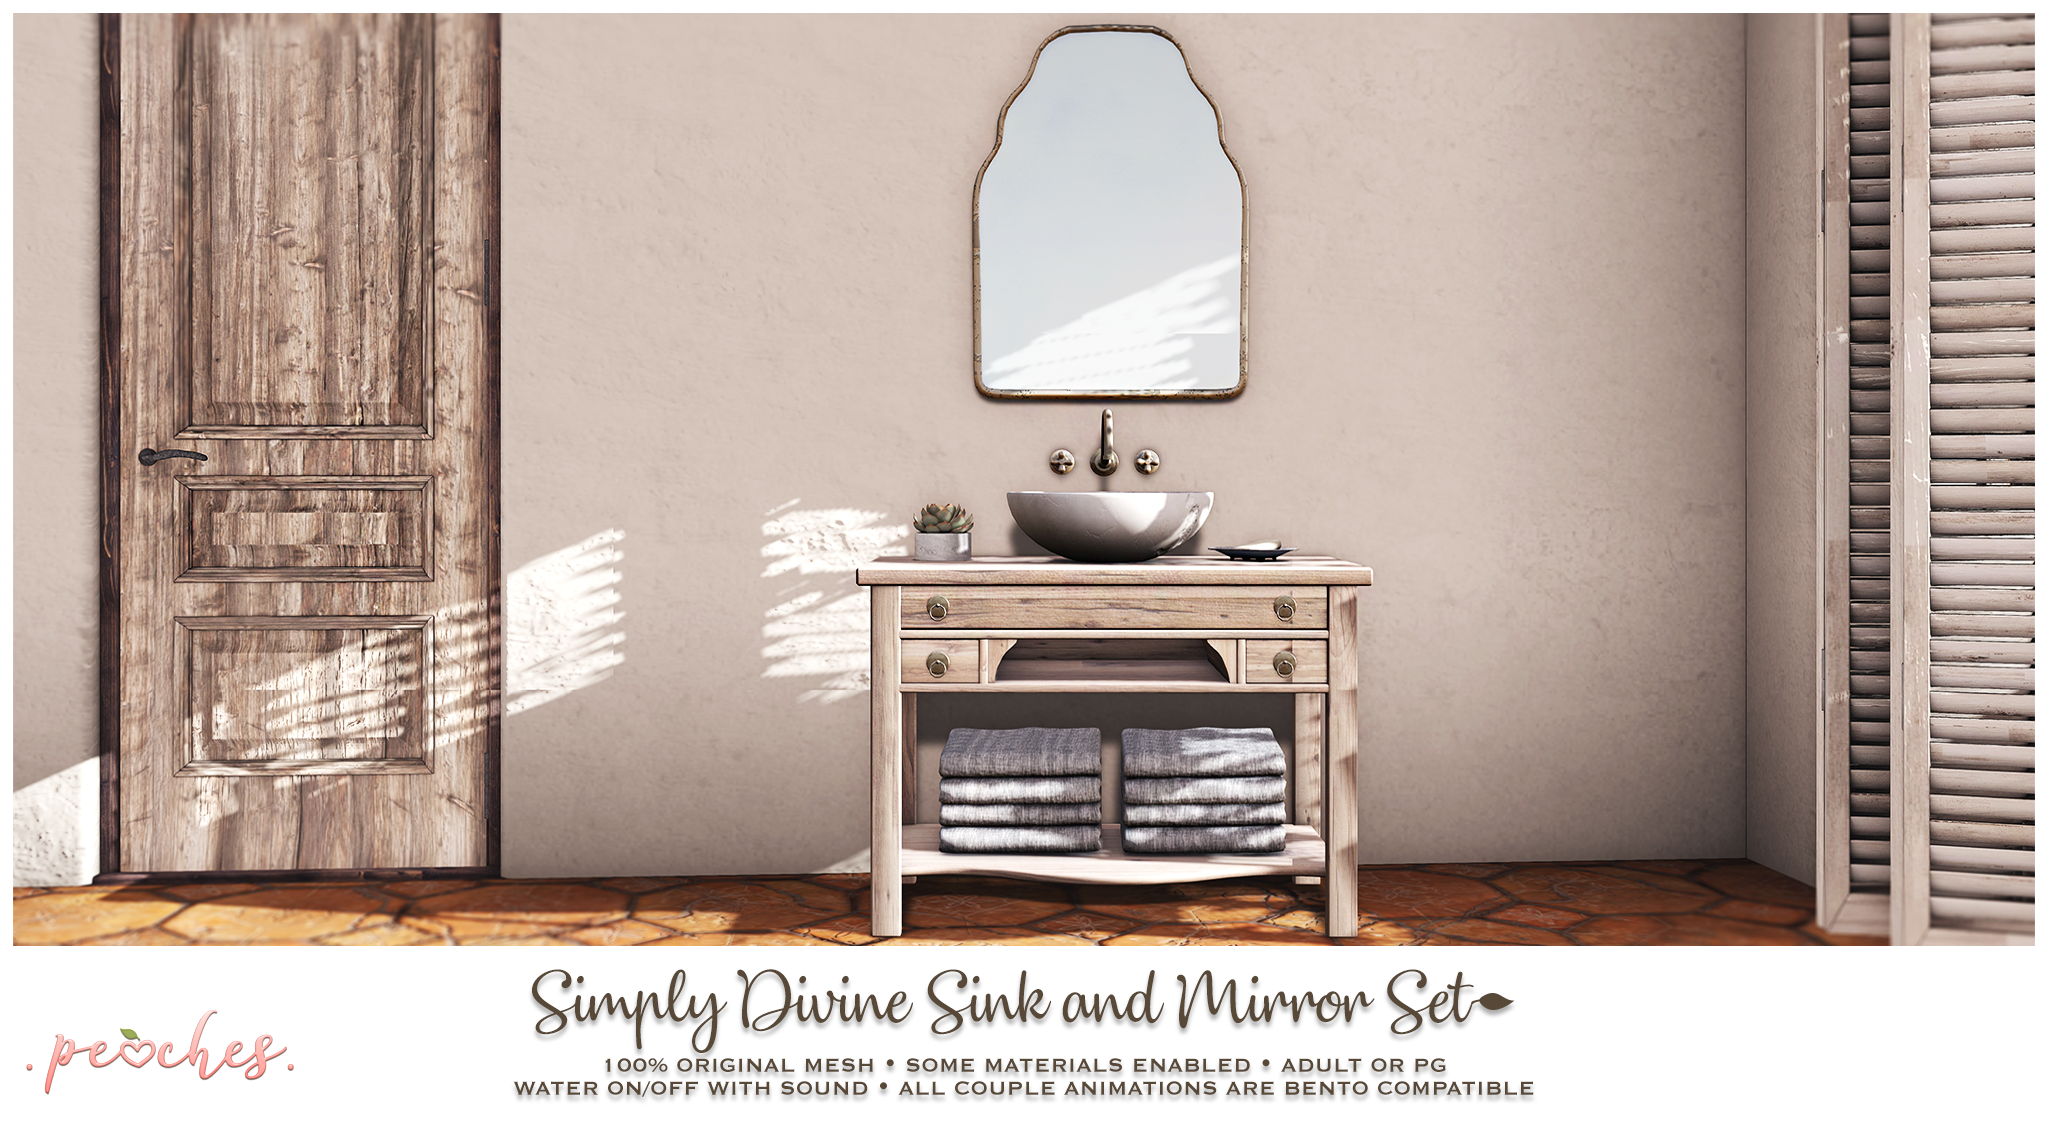 Peaches – Simply Divine Sink and Mirror Set